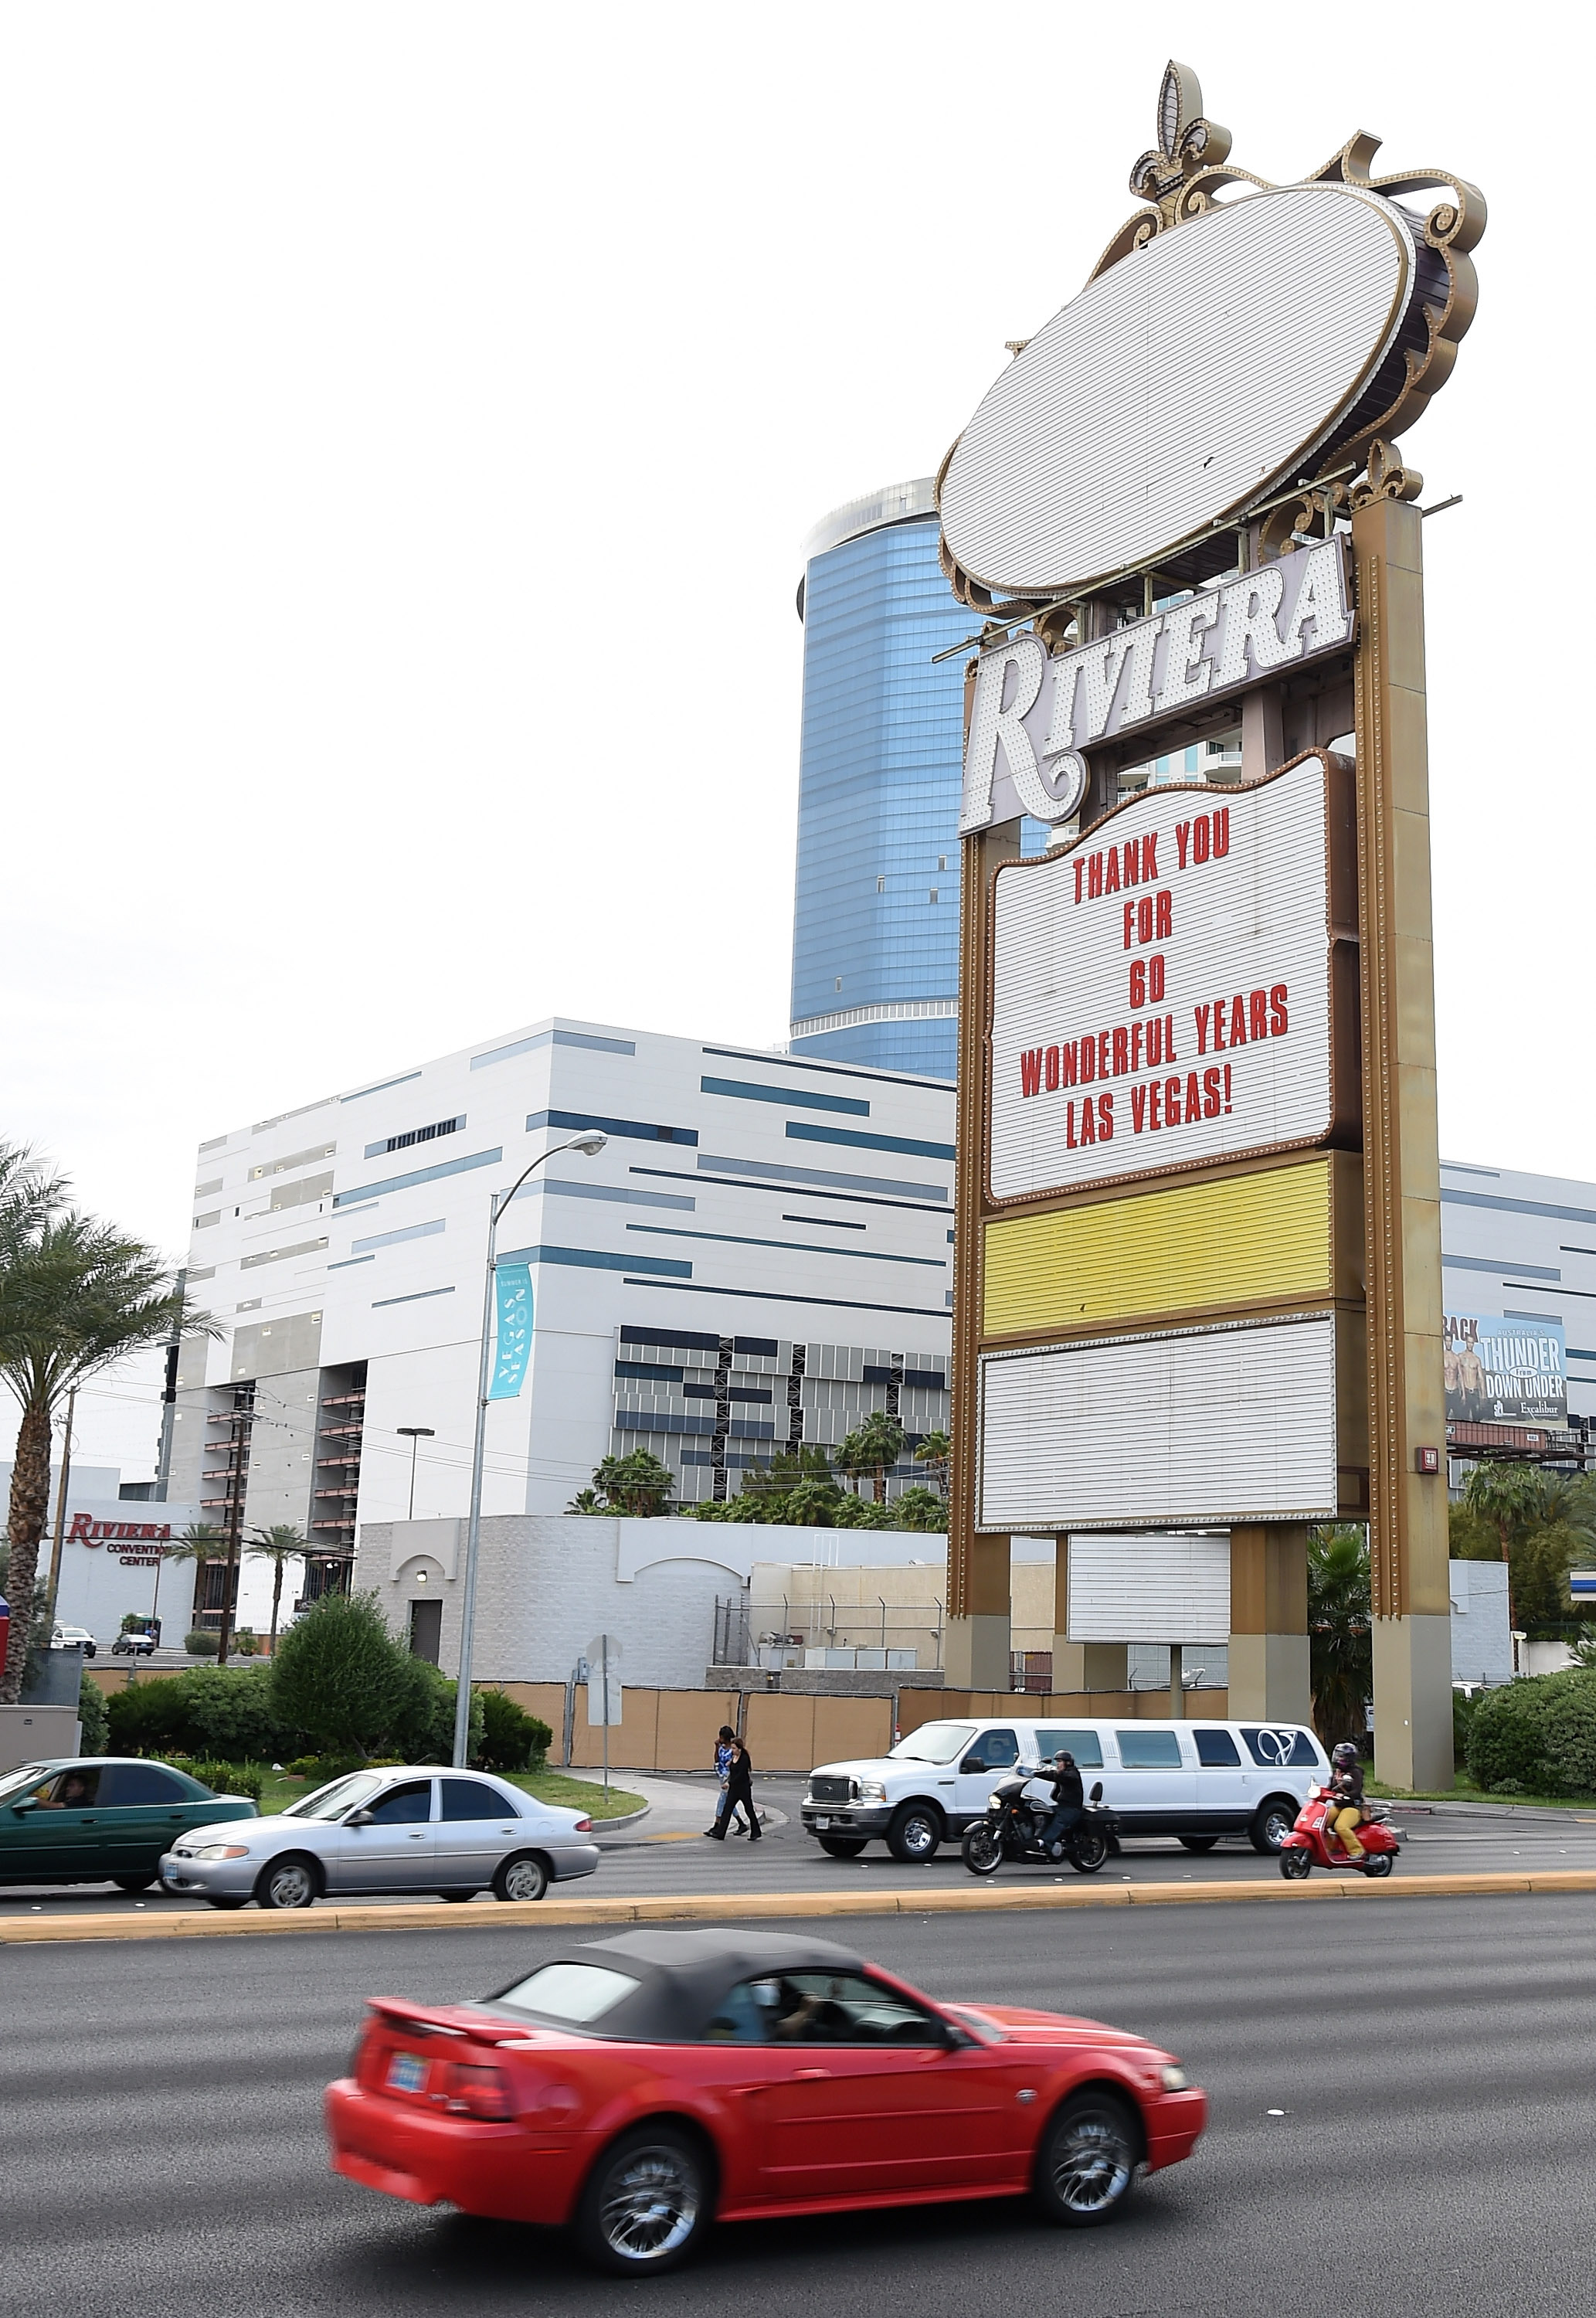 The Riviera closed on May 4. Now you can get your hands on what remains. 